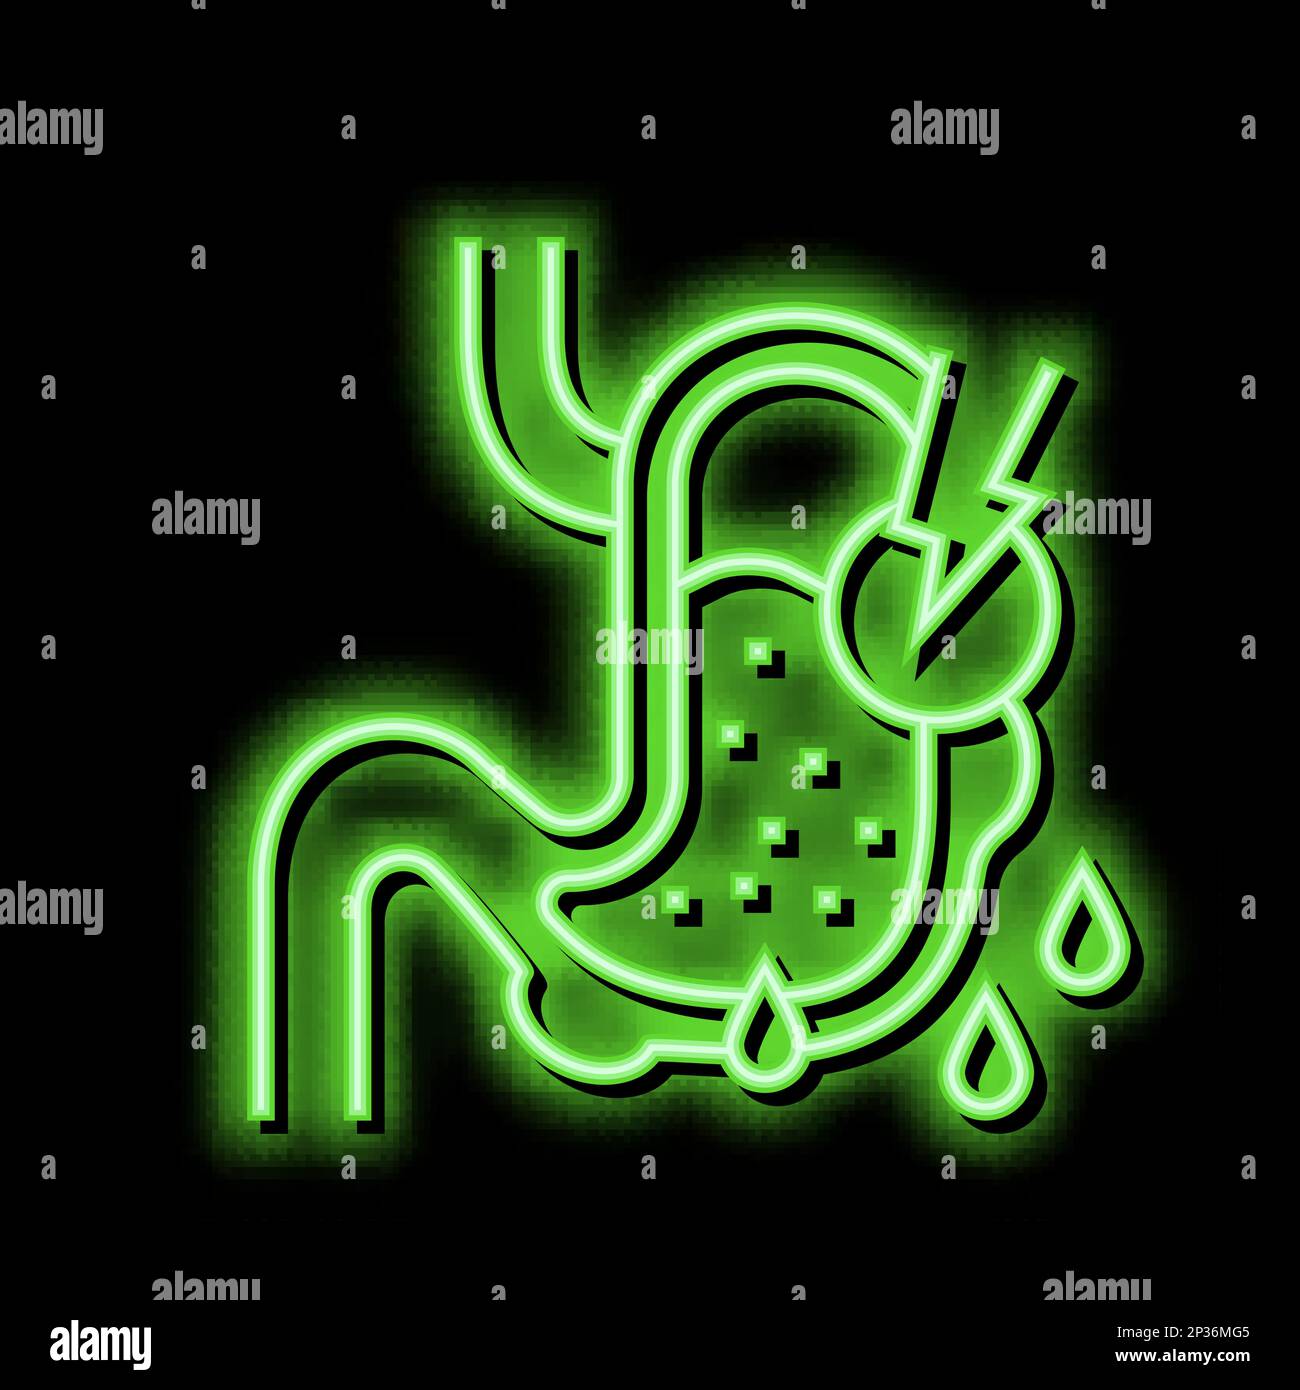 leaks in gastrointestinal system neon glow icon illustration Stock Vector